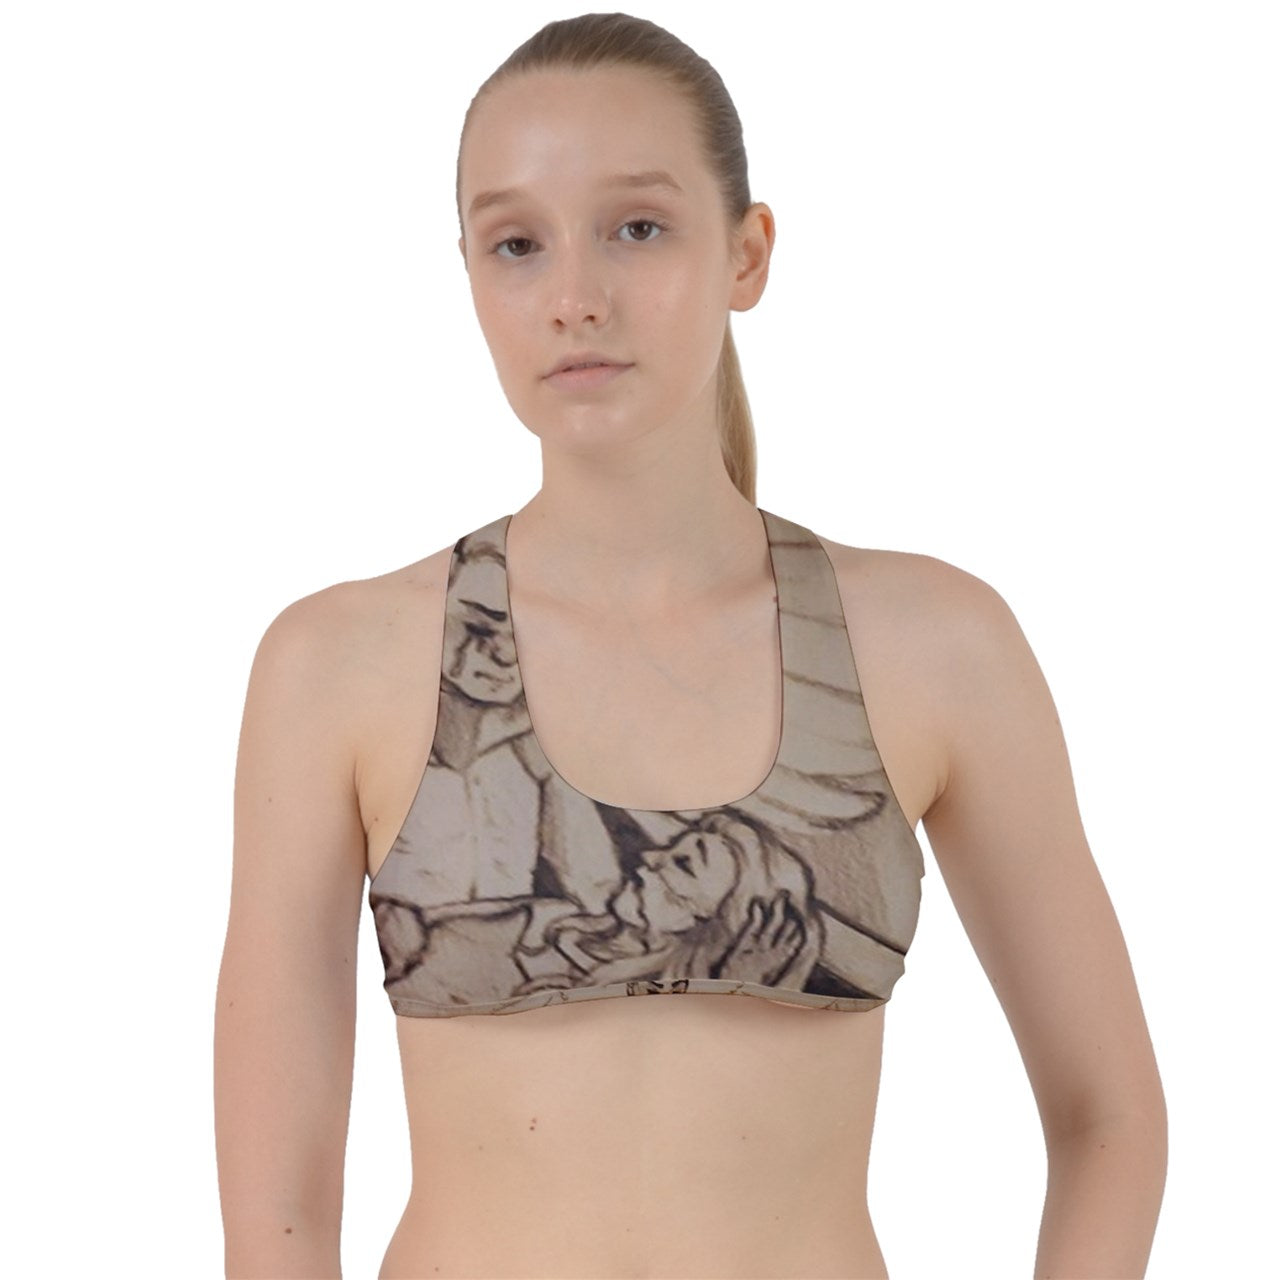 TCoE - "Live and Let Die" - Criss Cross Racerback Sports Bra